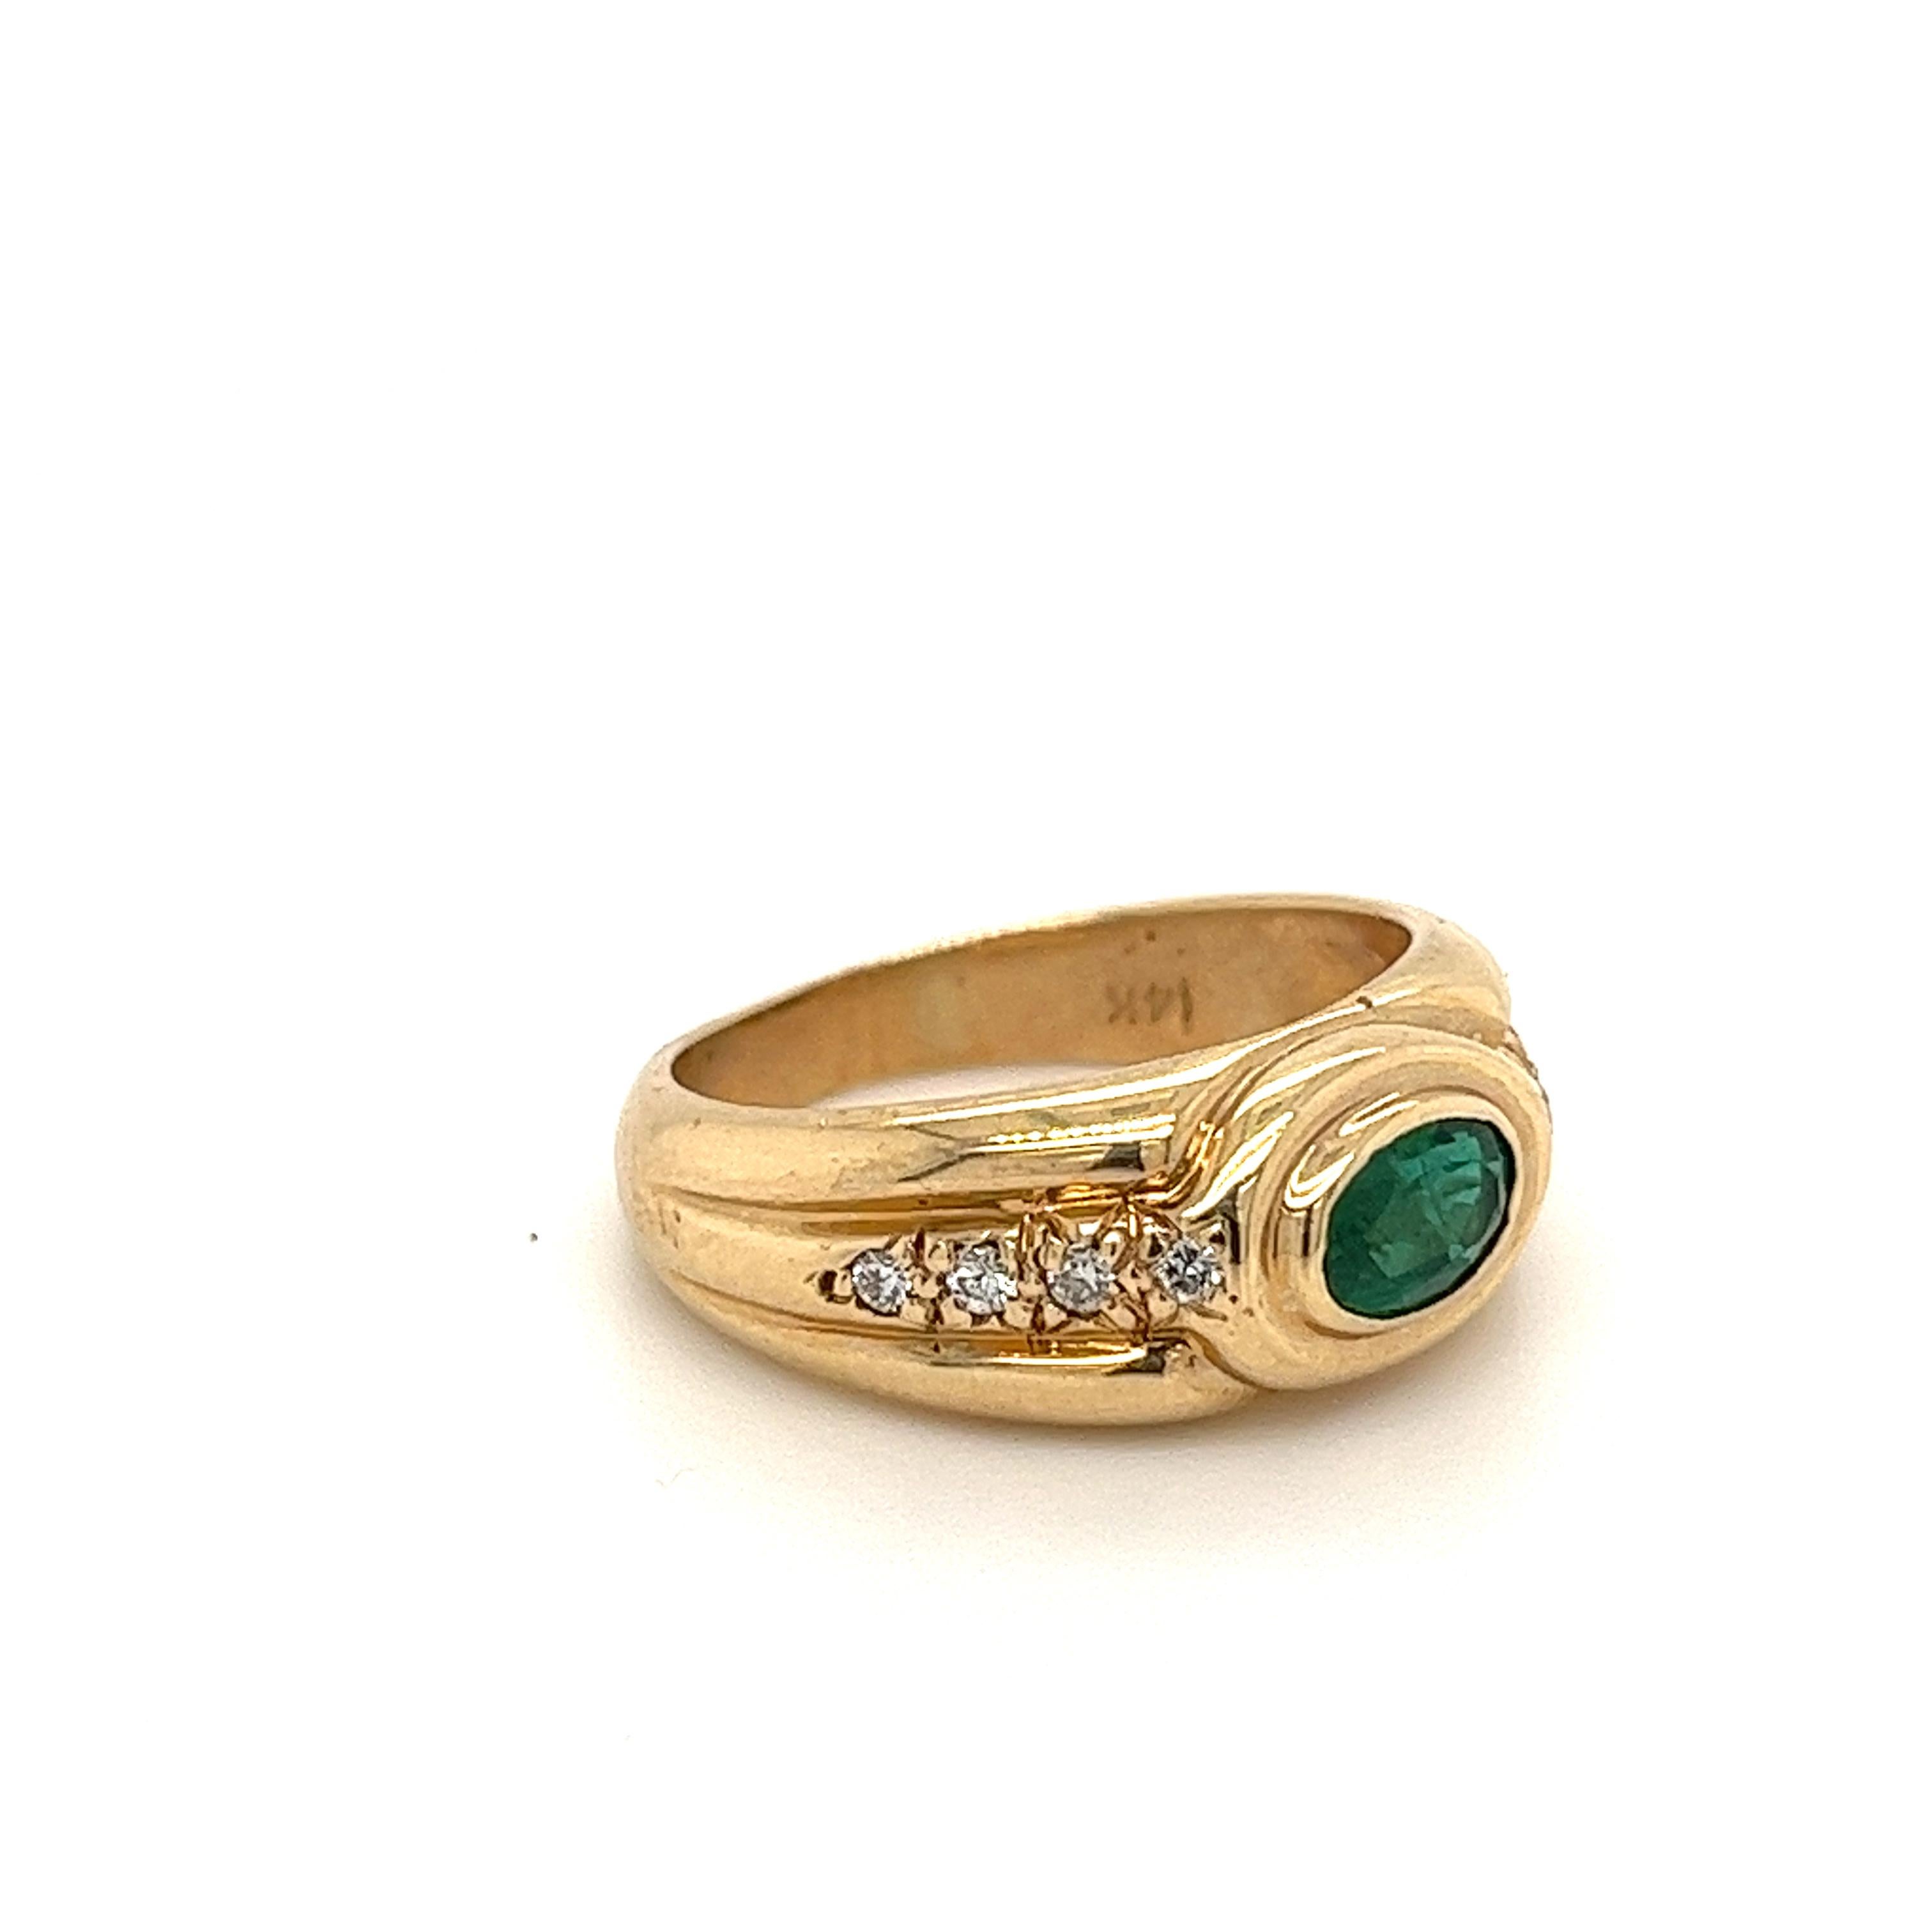 Natural emerald set with natural round cut diamond side stones in 14k yellow gold ring. Suitable as a men's pinky ring and ladies cocktail ring. 

Hypoallergenic, waterproof, and tarnish-proof. Ideal for daily wear. 

Specifics:
✔ Natural Emerald
✔